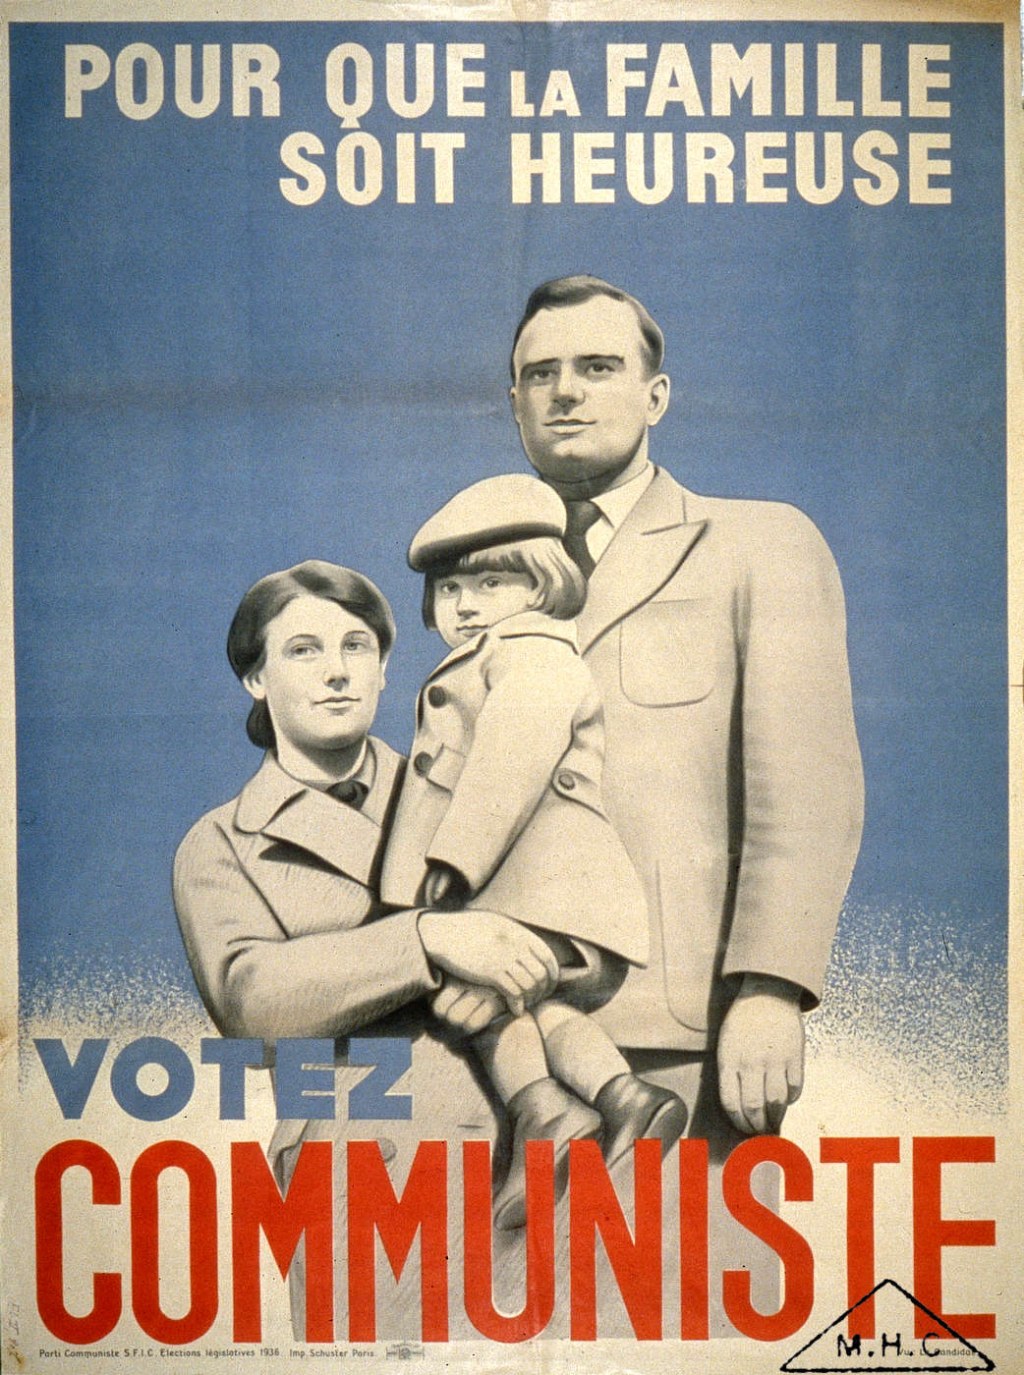 french politics 1930s - When the Workers Were Communists